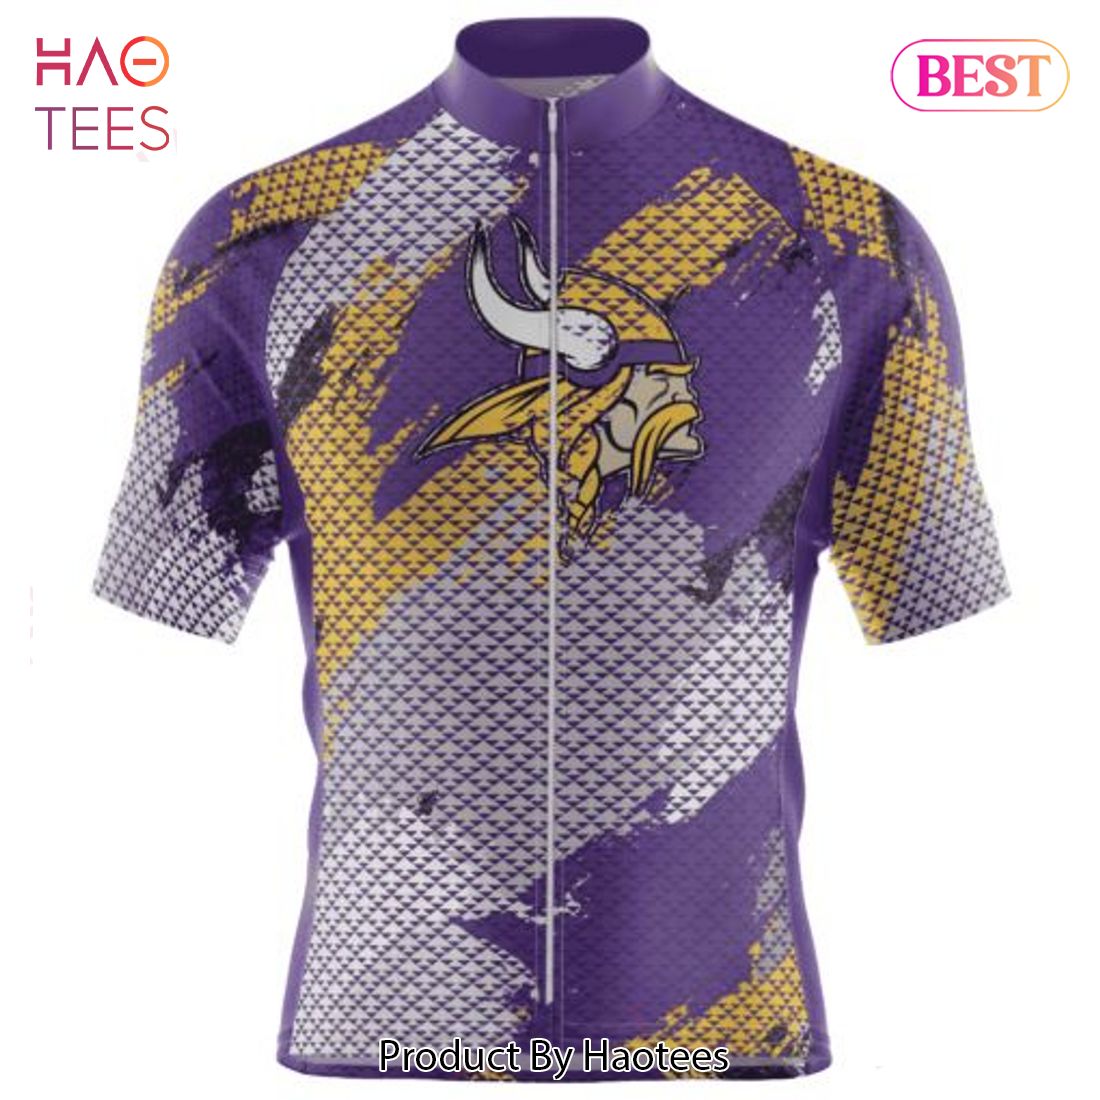 HOT NFL Minnesota Vikings Special Design Cycling Jersey Hoodie